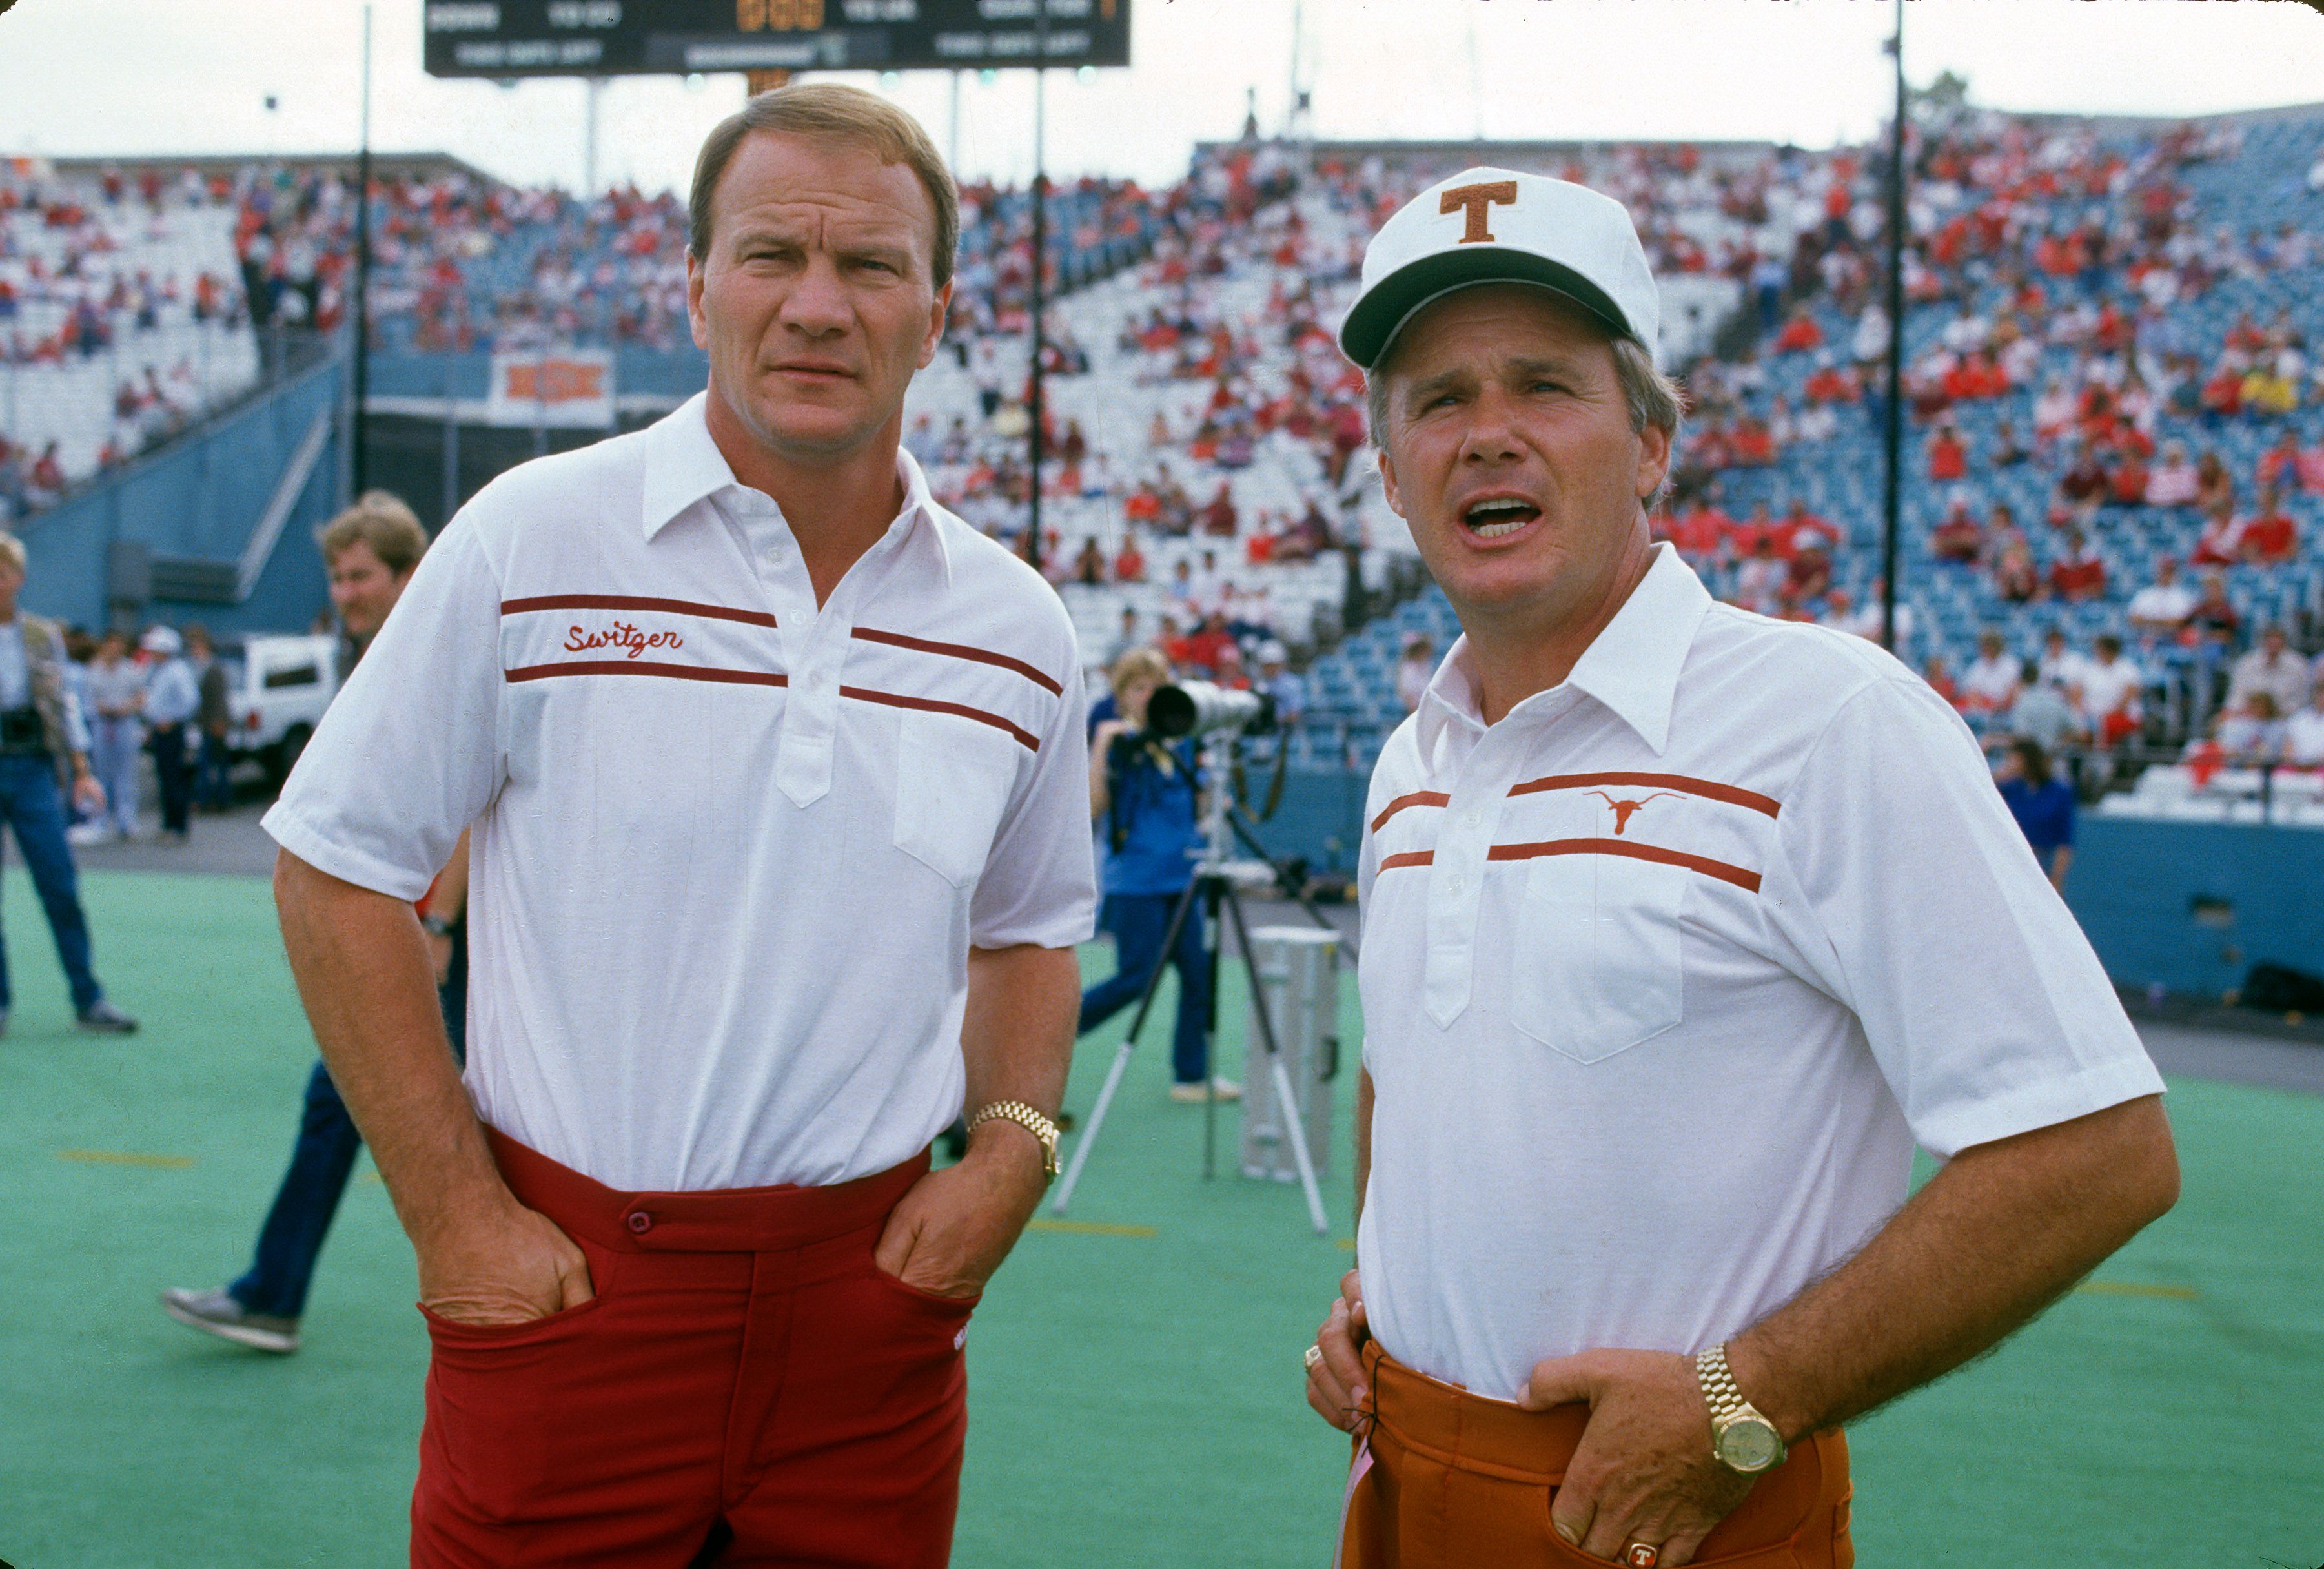  Barry Switzer of the University of Oklahoma and Fred Akers looks on prior to their NCAA football game October 11, 1986, in Dallas, Texas. | Photo: Getty Images